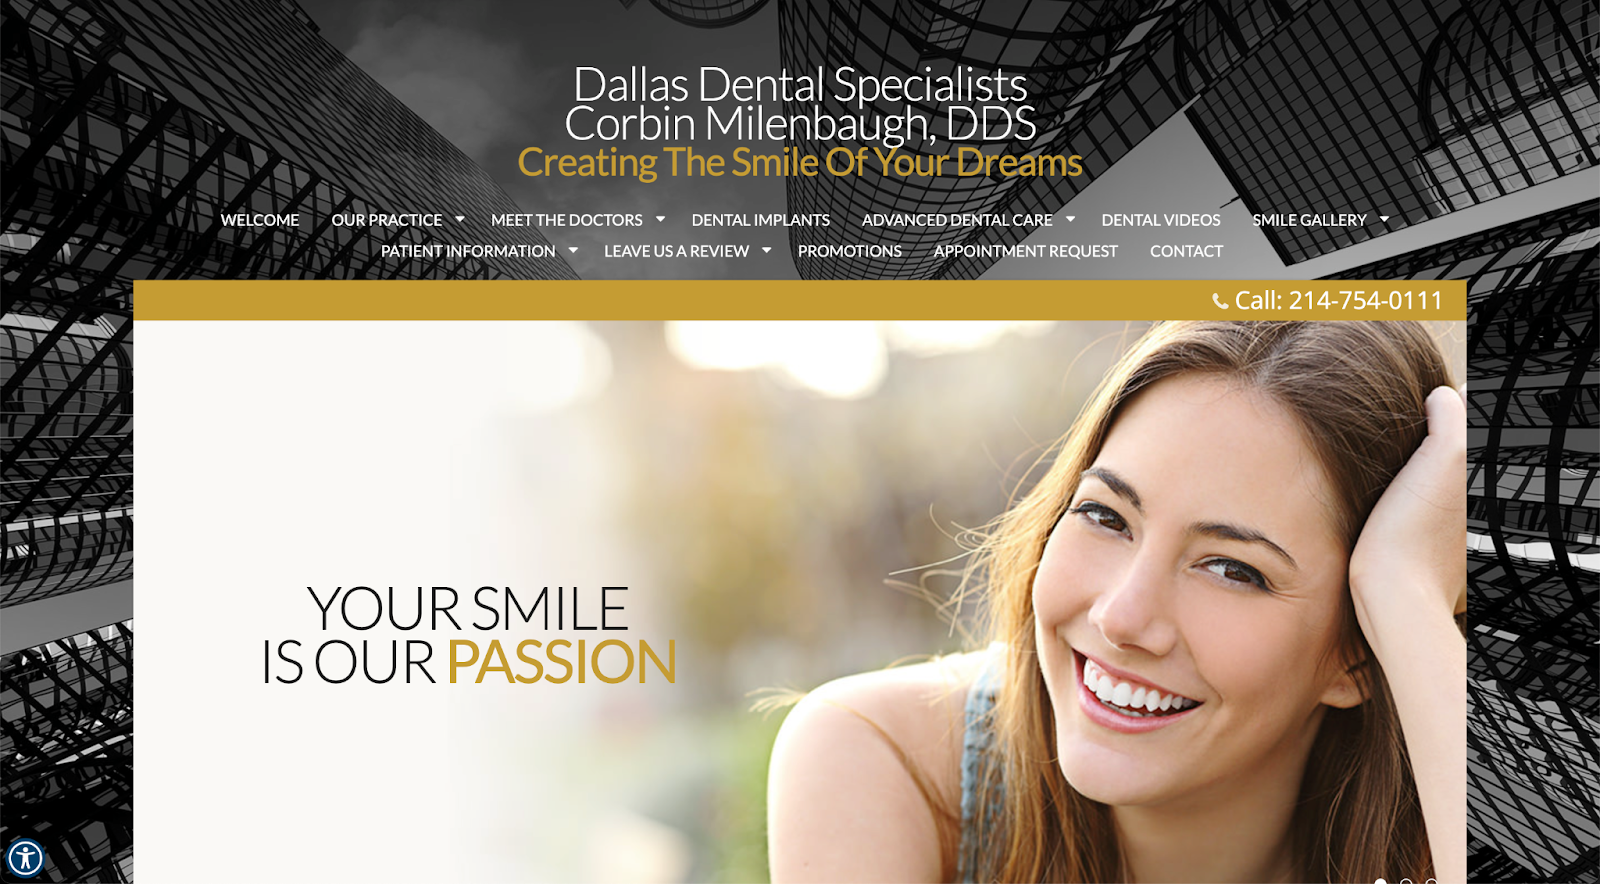 Bold color schemes evoke a professional air for this dental website at Dallas Dental Specialists